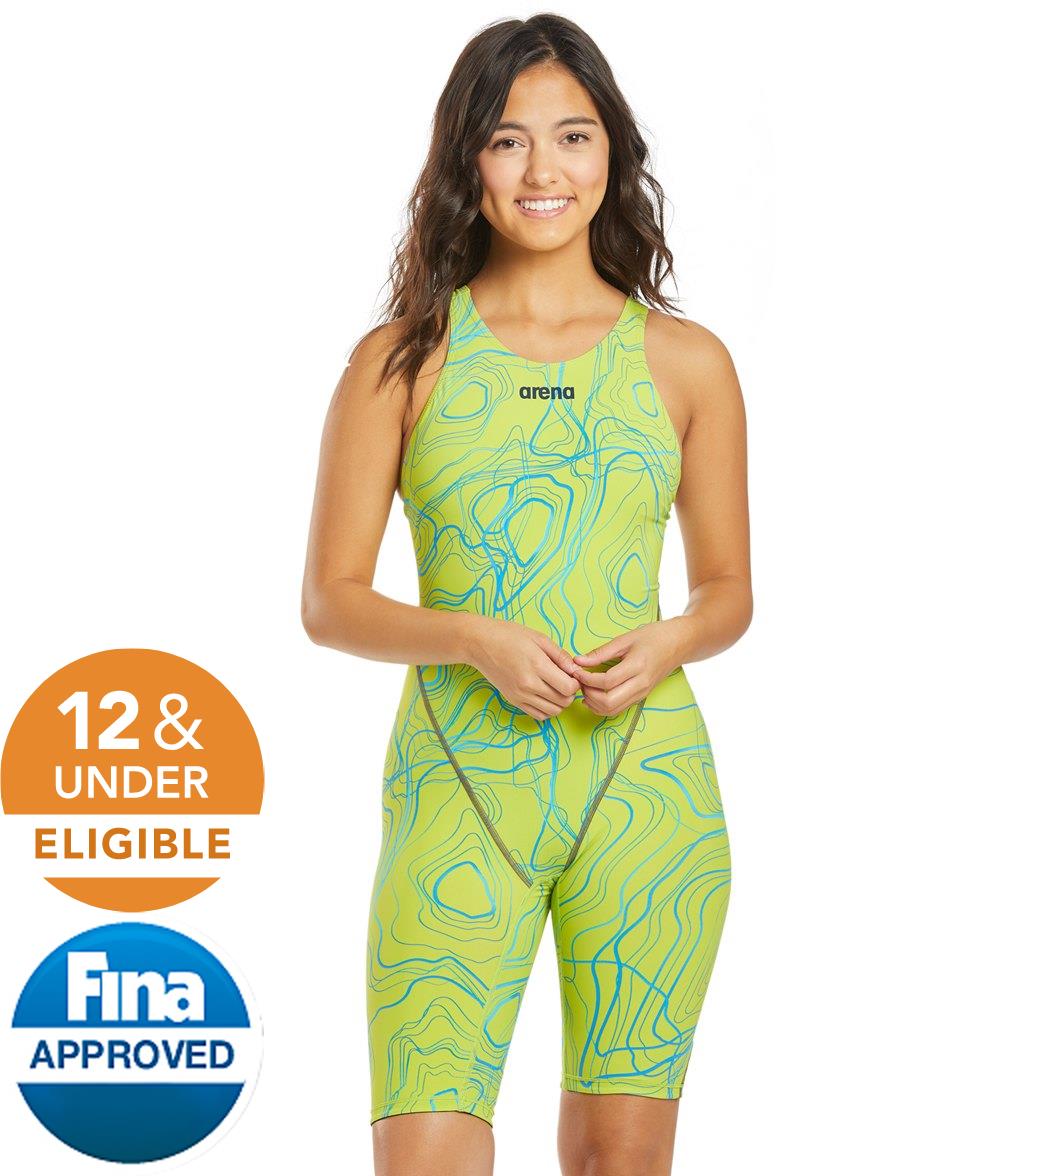 Arena Women's Limited Edition Powerskin St 2.0 Full Body Open Back Tech Suit Swimsuit - Sonic Lime 26 Elastane/Polyamide - Swimoutlet.com